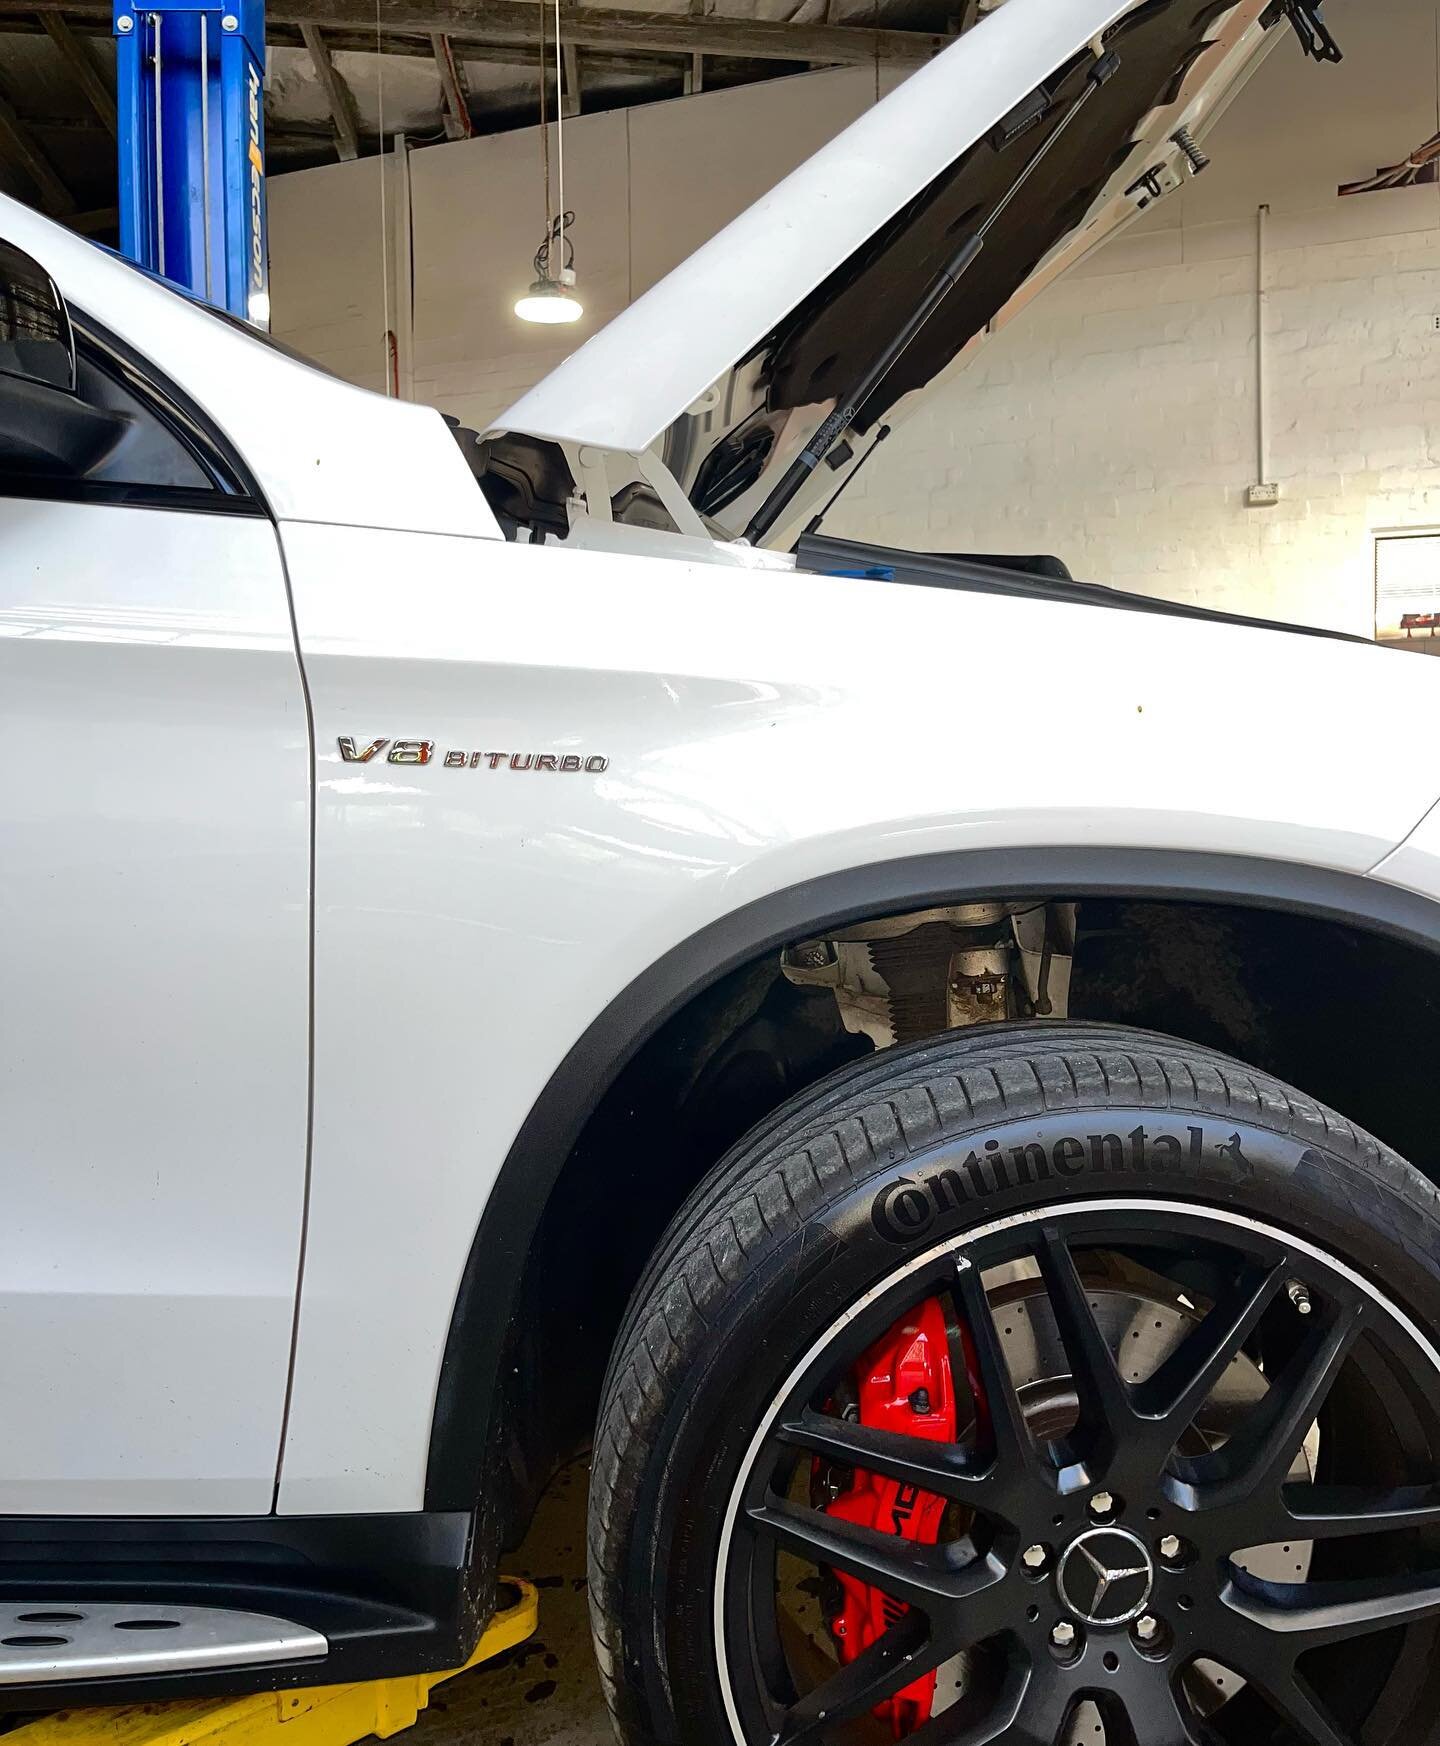 New brakes on this GLE63s 🛠 Book in your vehicle for a service and repairs with our qualified technicians at Karworx! 🧑&zwj;🔧Call us today to book in or click the link in our bio to contact us!
📞Essendon 9370 2323
📞Collingwood 9419 8721
📞Ringwo